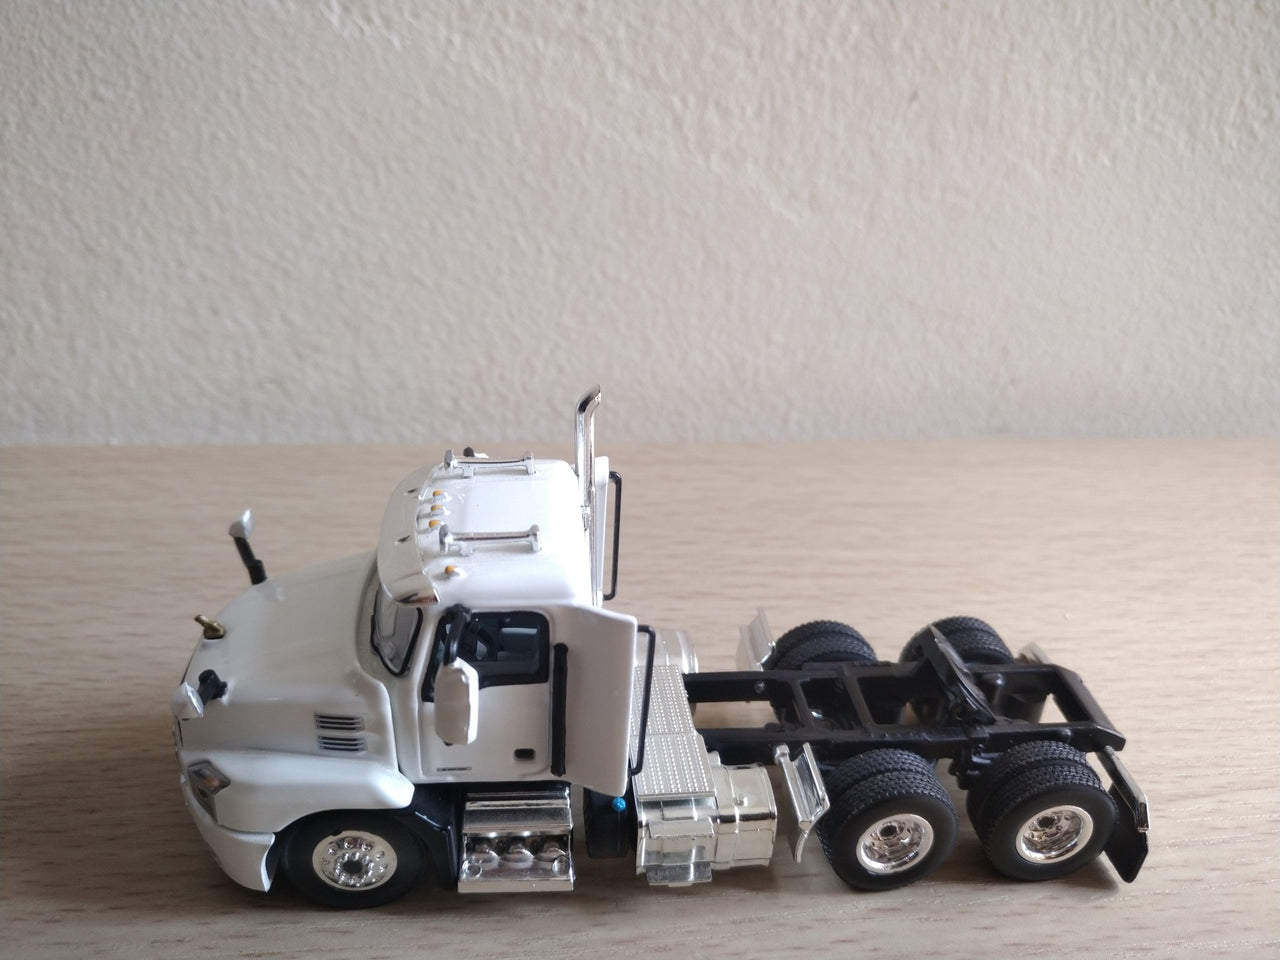 60-0595 Mack Anthem Day Cab Tractor Scale 1:64 (Discontinued Model)